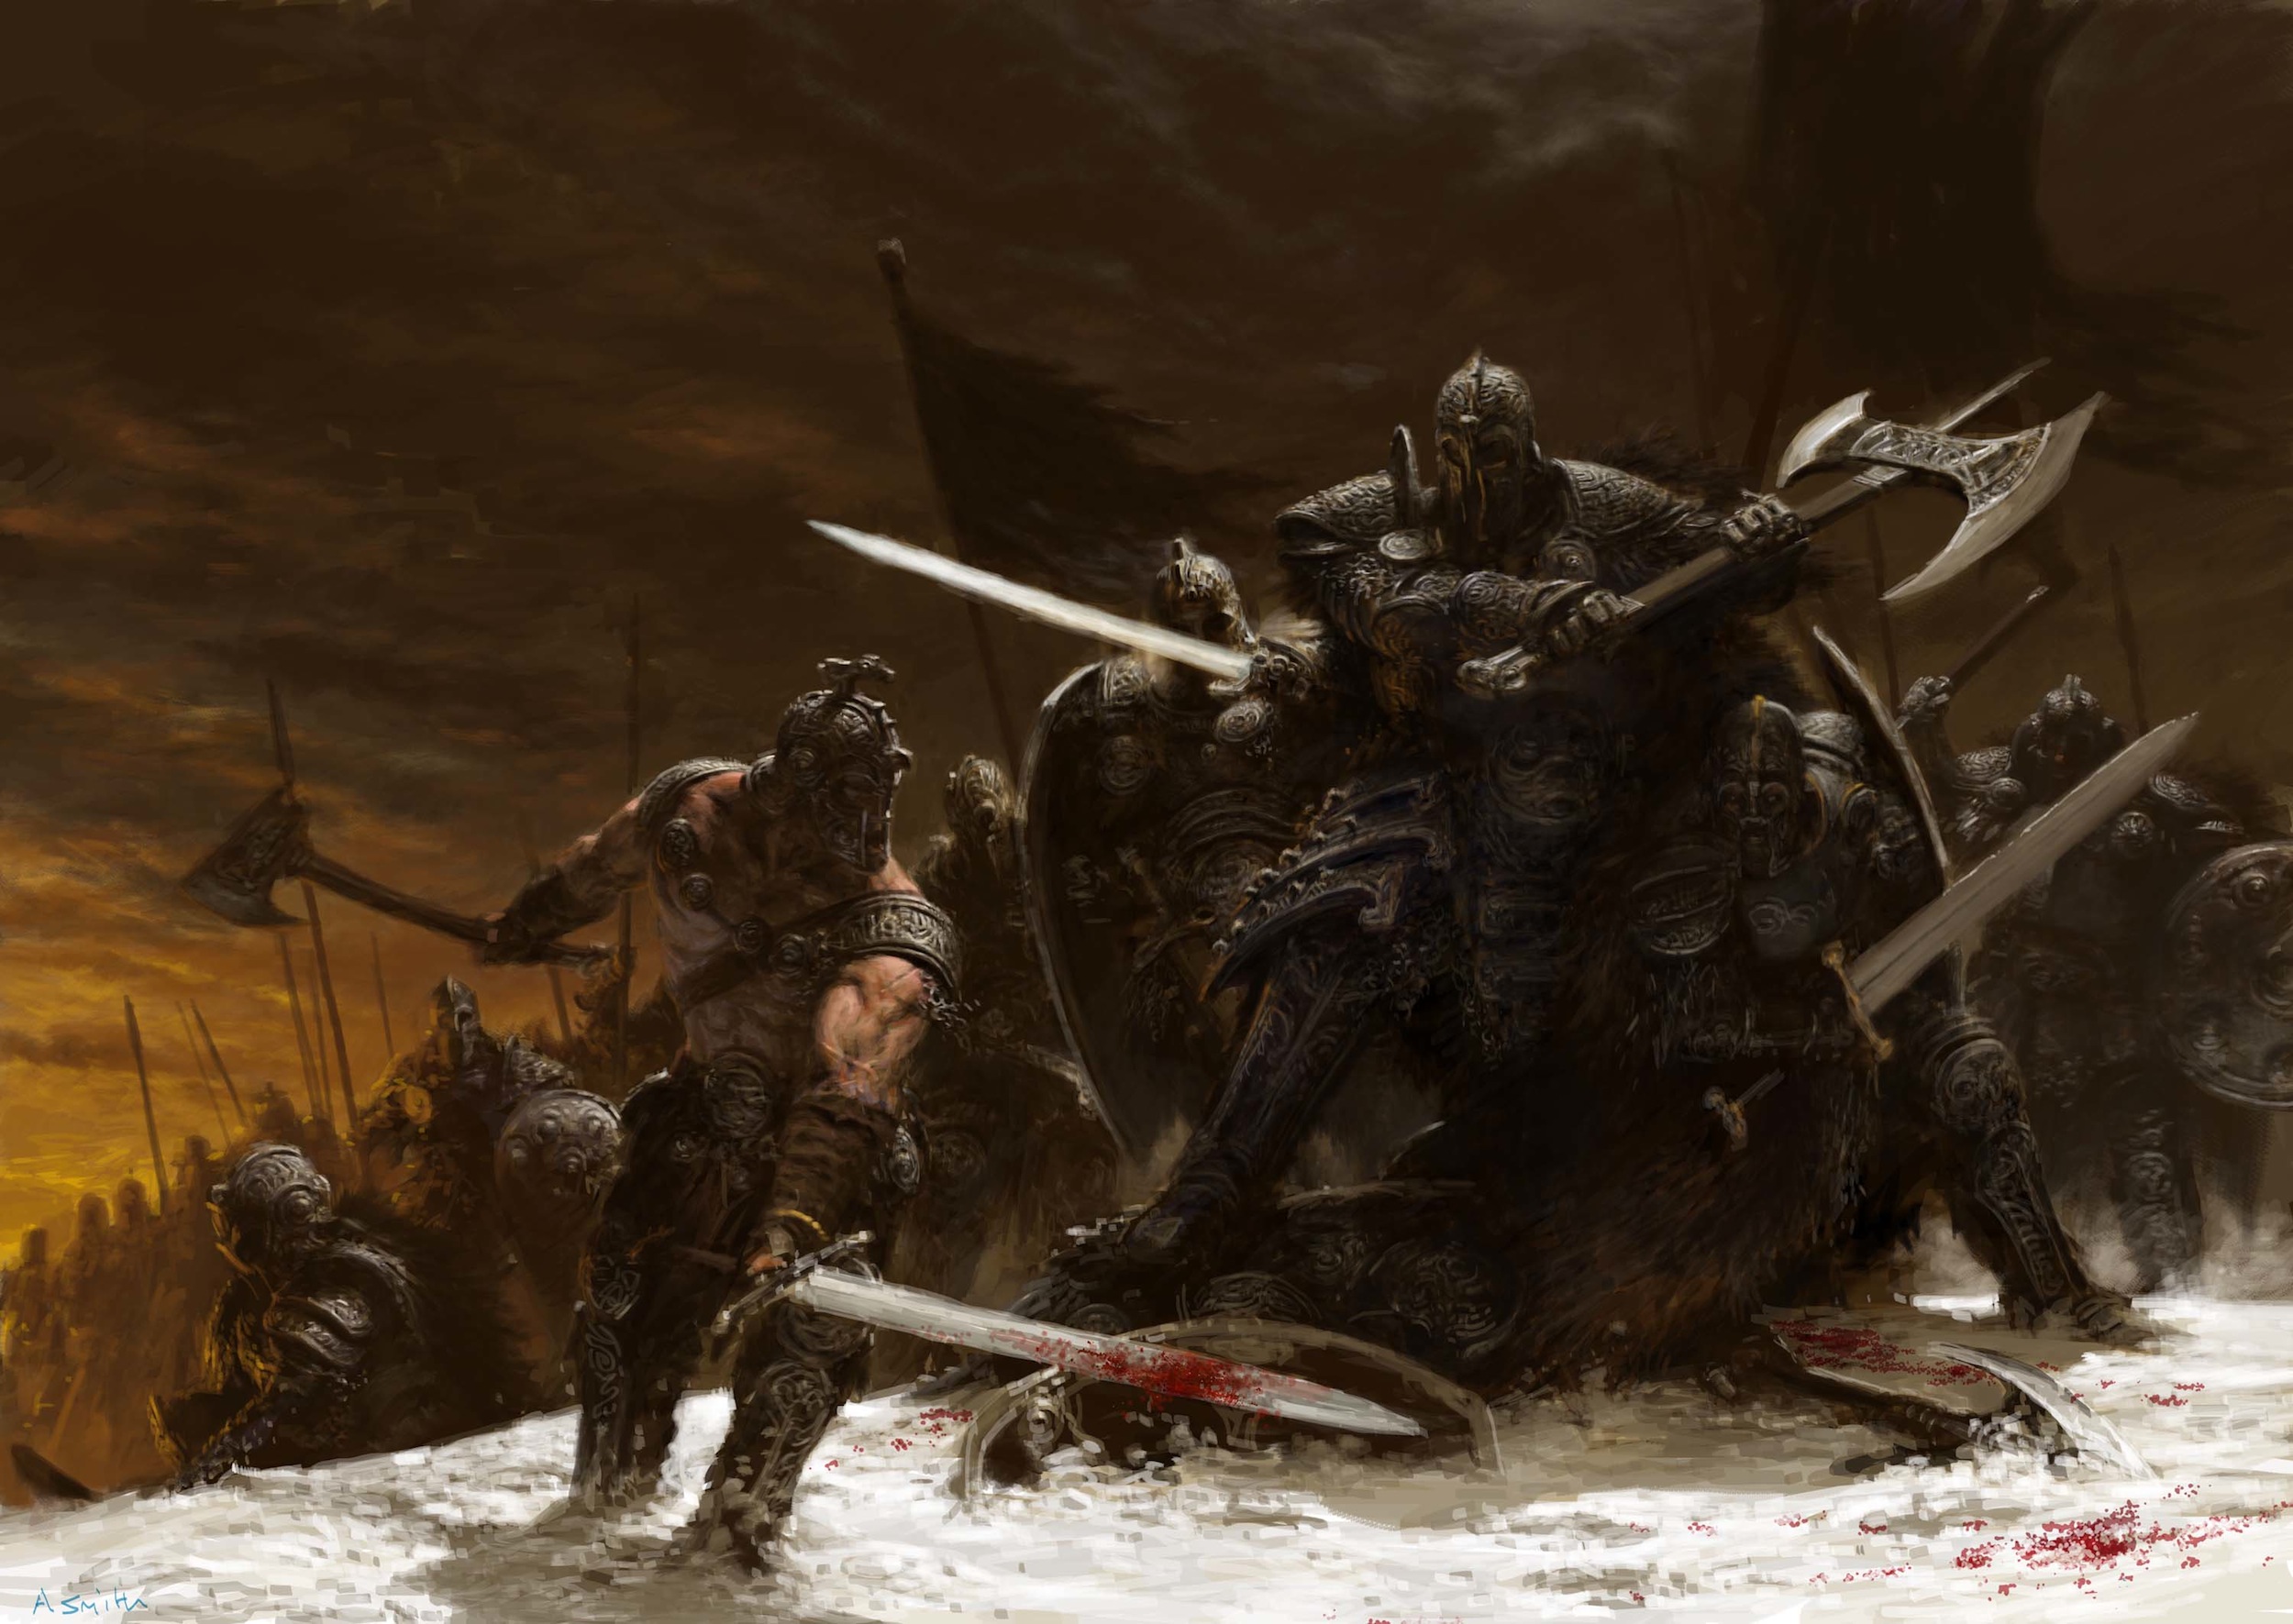 2500x1771_1252_Fight1_2d_fantasy_battle_fight_warriors_speed_painting_picture_image_digital_art